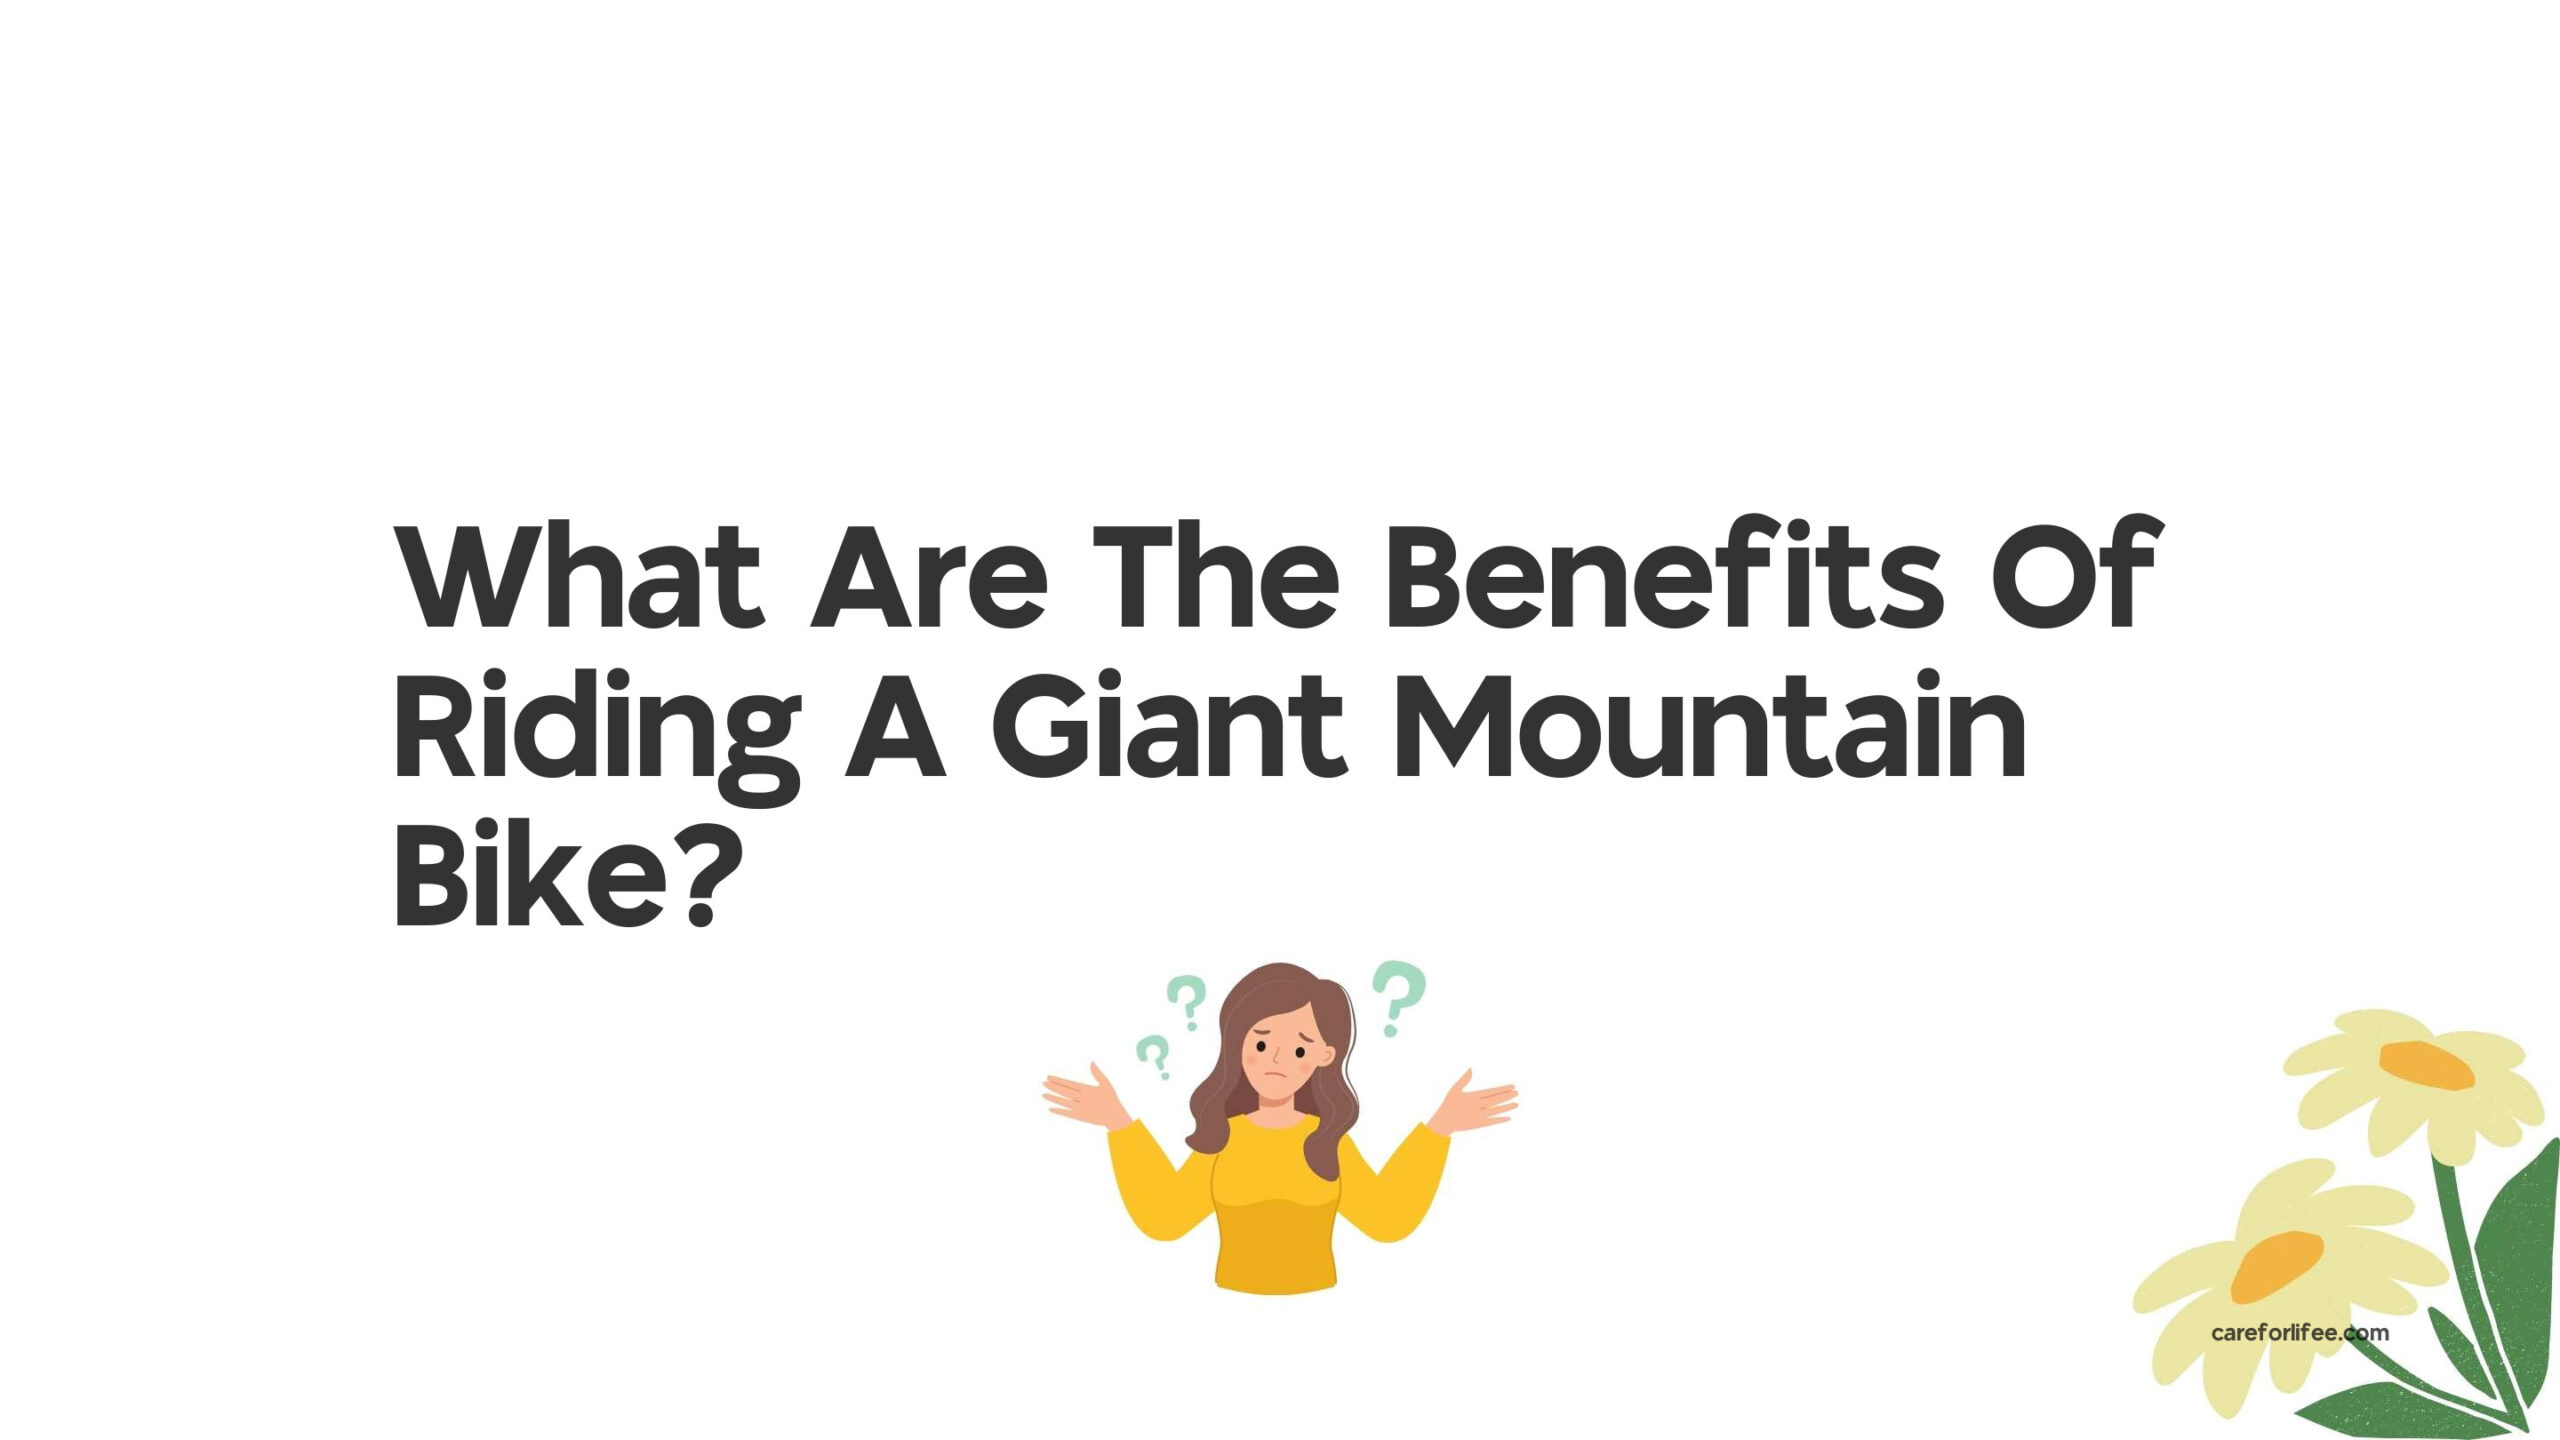 What Are The Benefits Of Riding A Giant Mountain Bike?